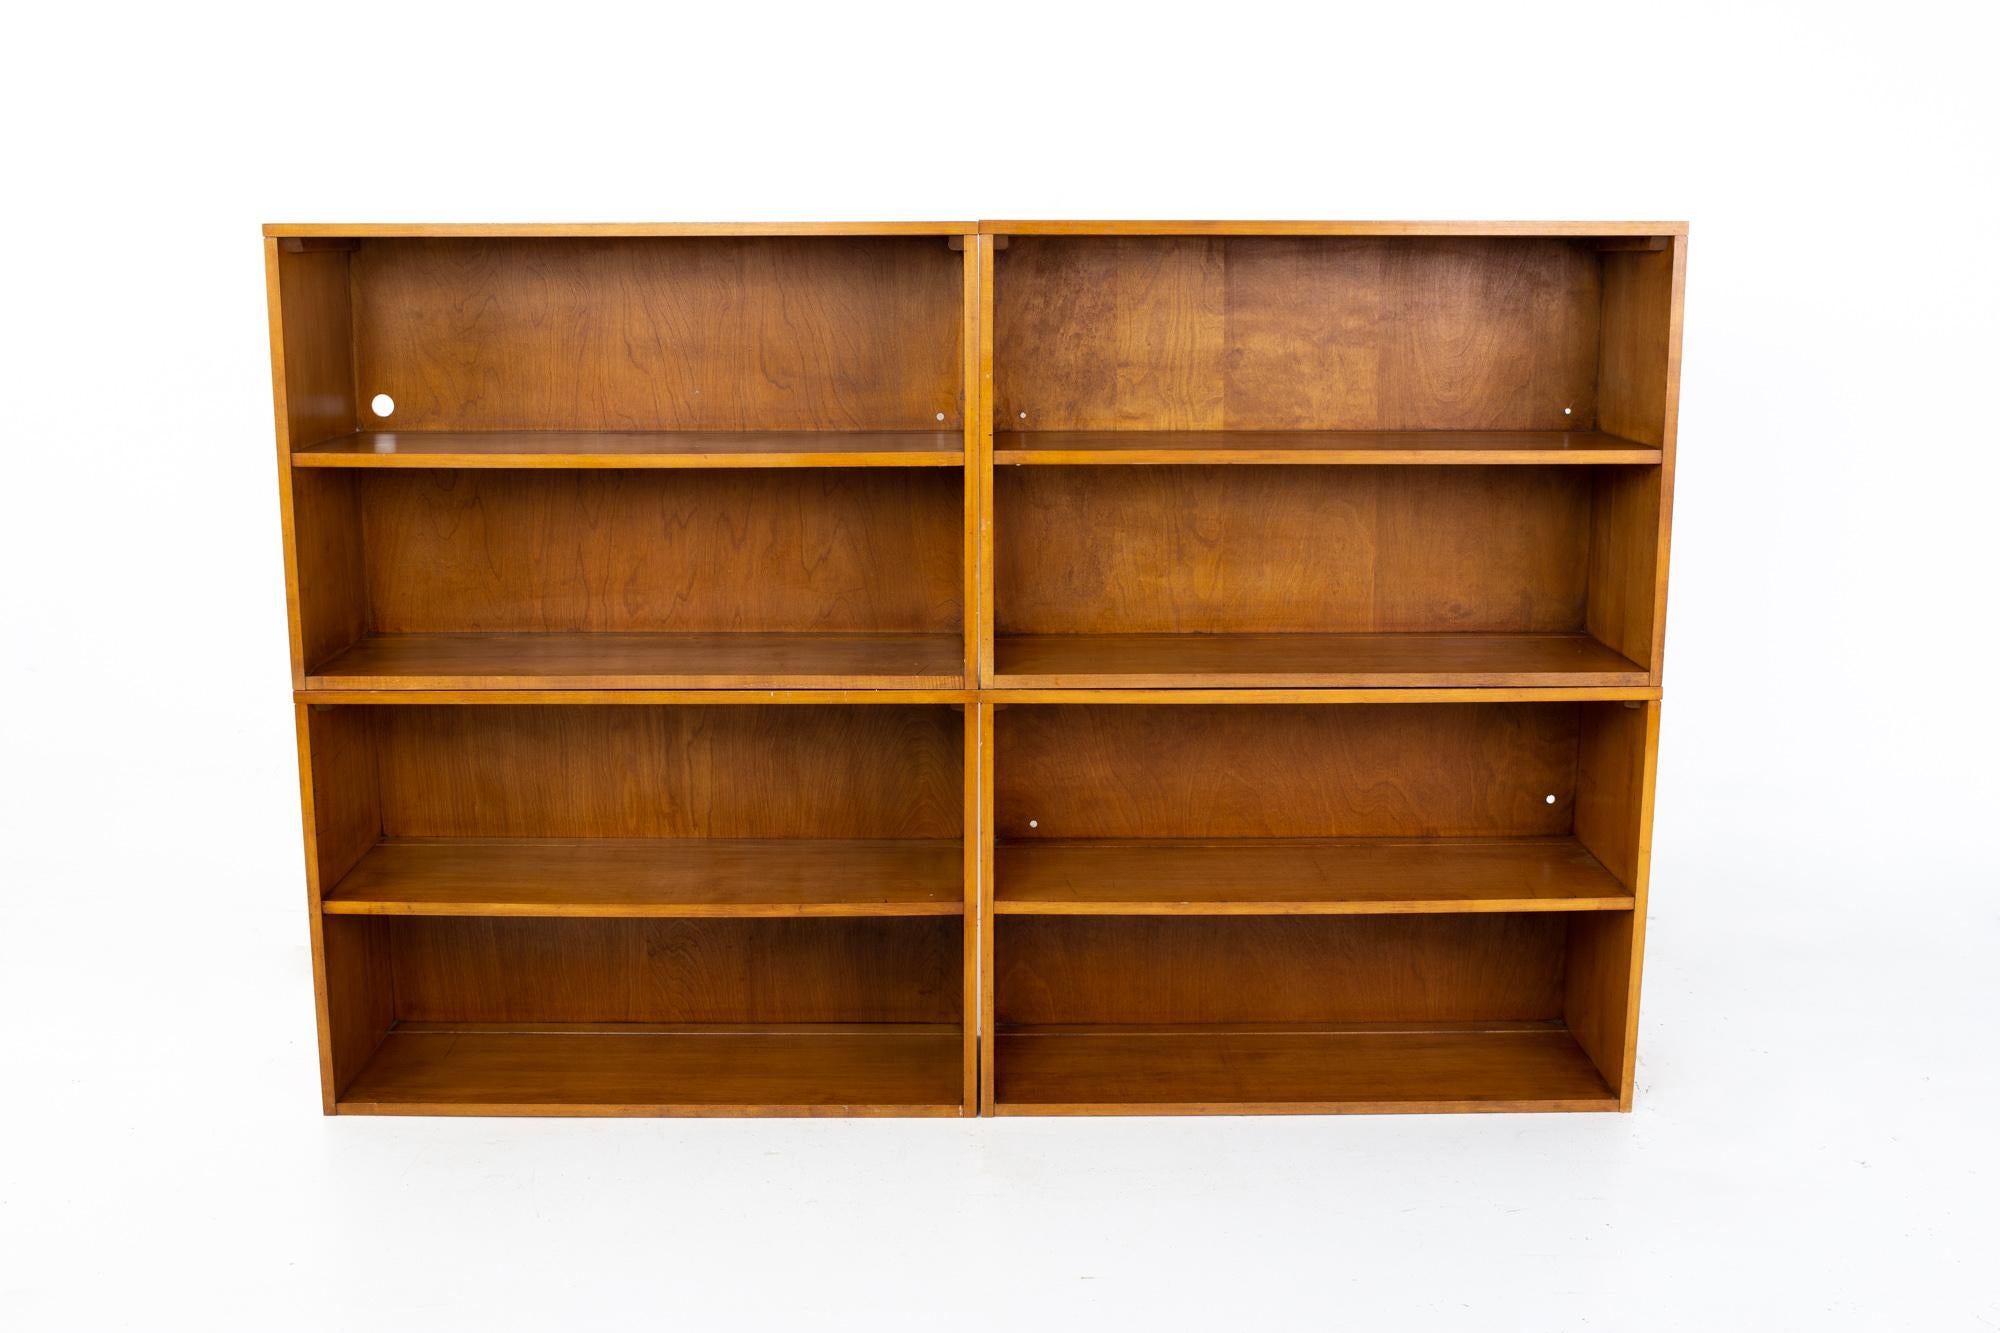 Paul McCobb mid century bookcase
Bookcase measures: 36 wide x 12.25 deep 24 inches high, total height of all 4 pieces is 96 inches

All pieces of furniture can be had in what we call restored vintage condition. That means the piece is restored